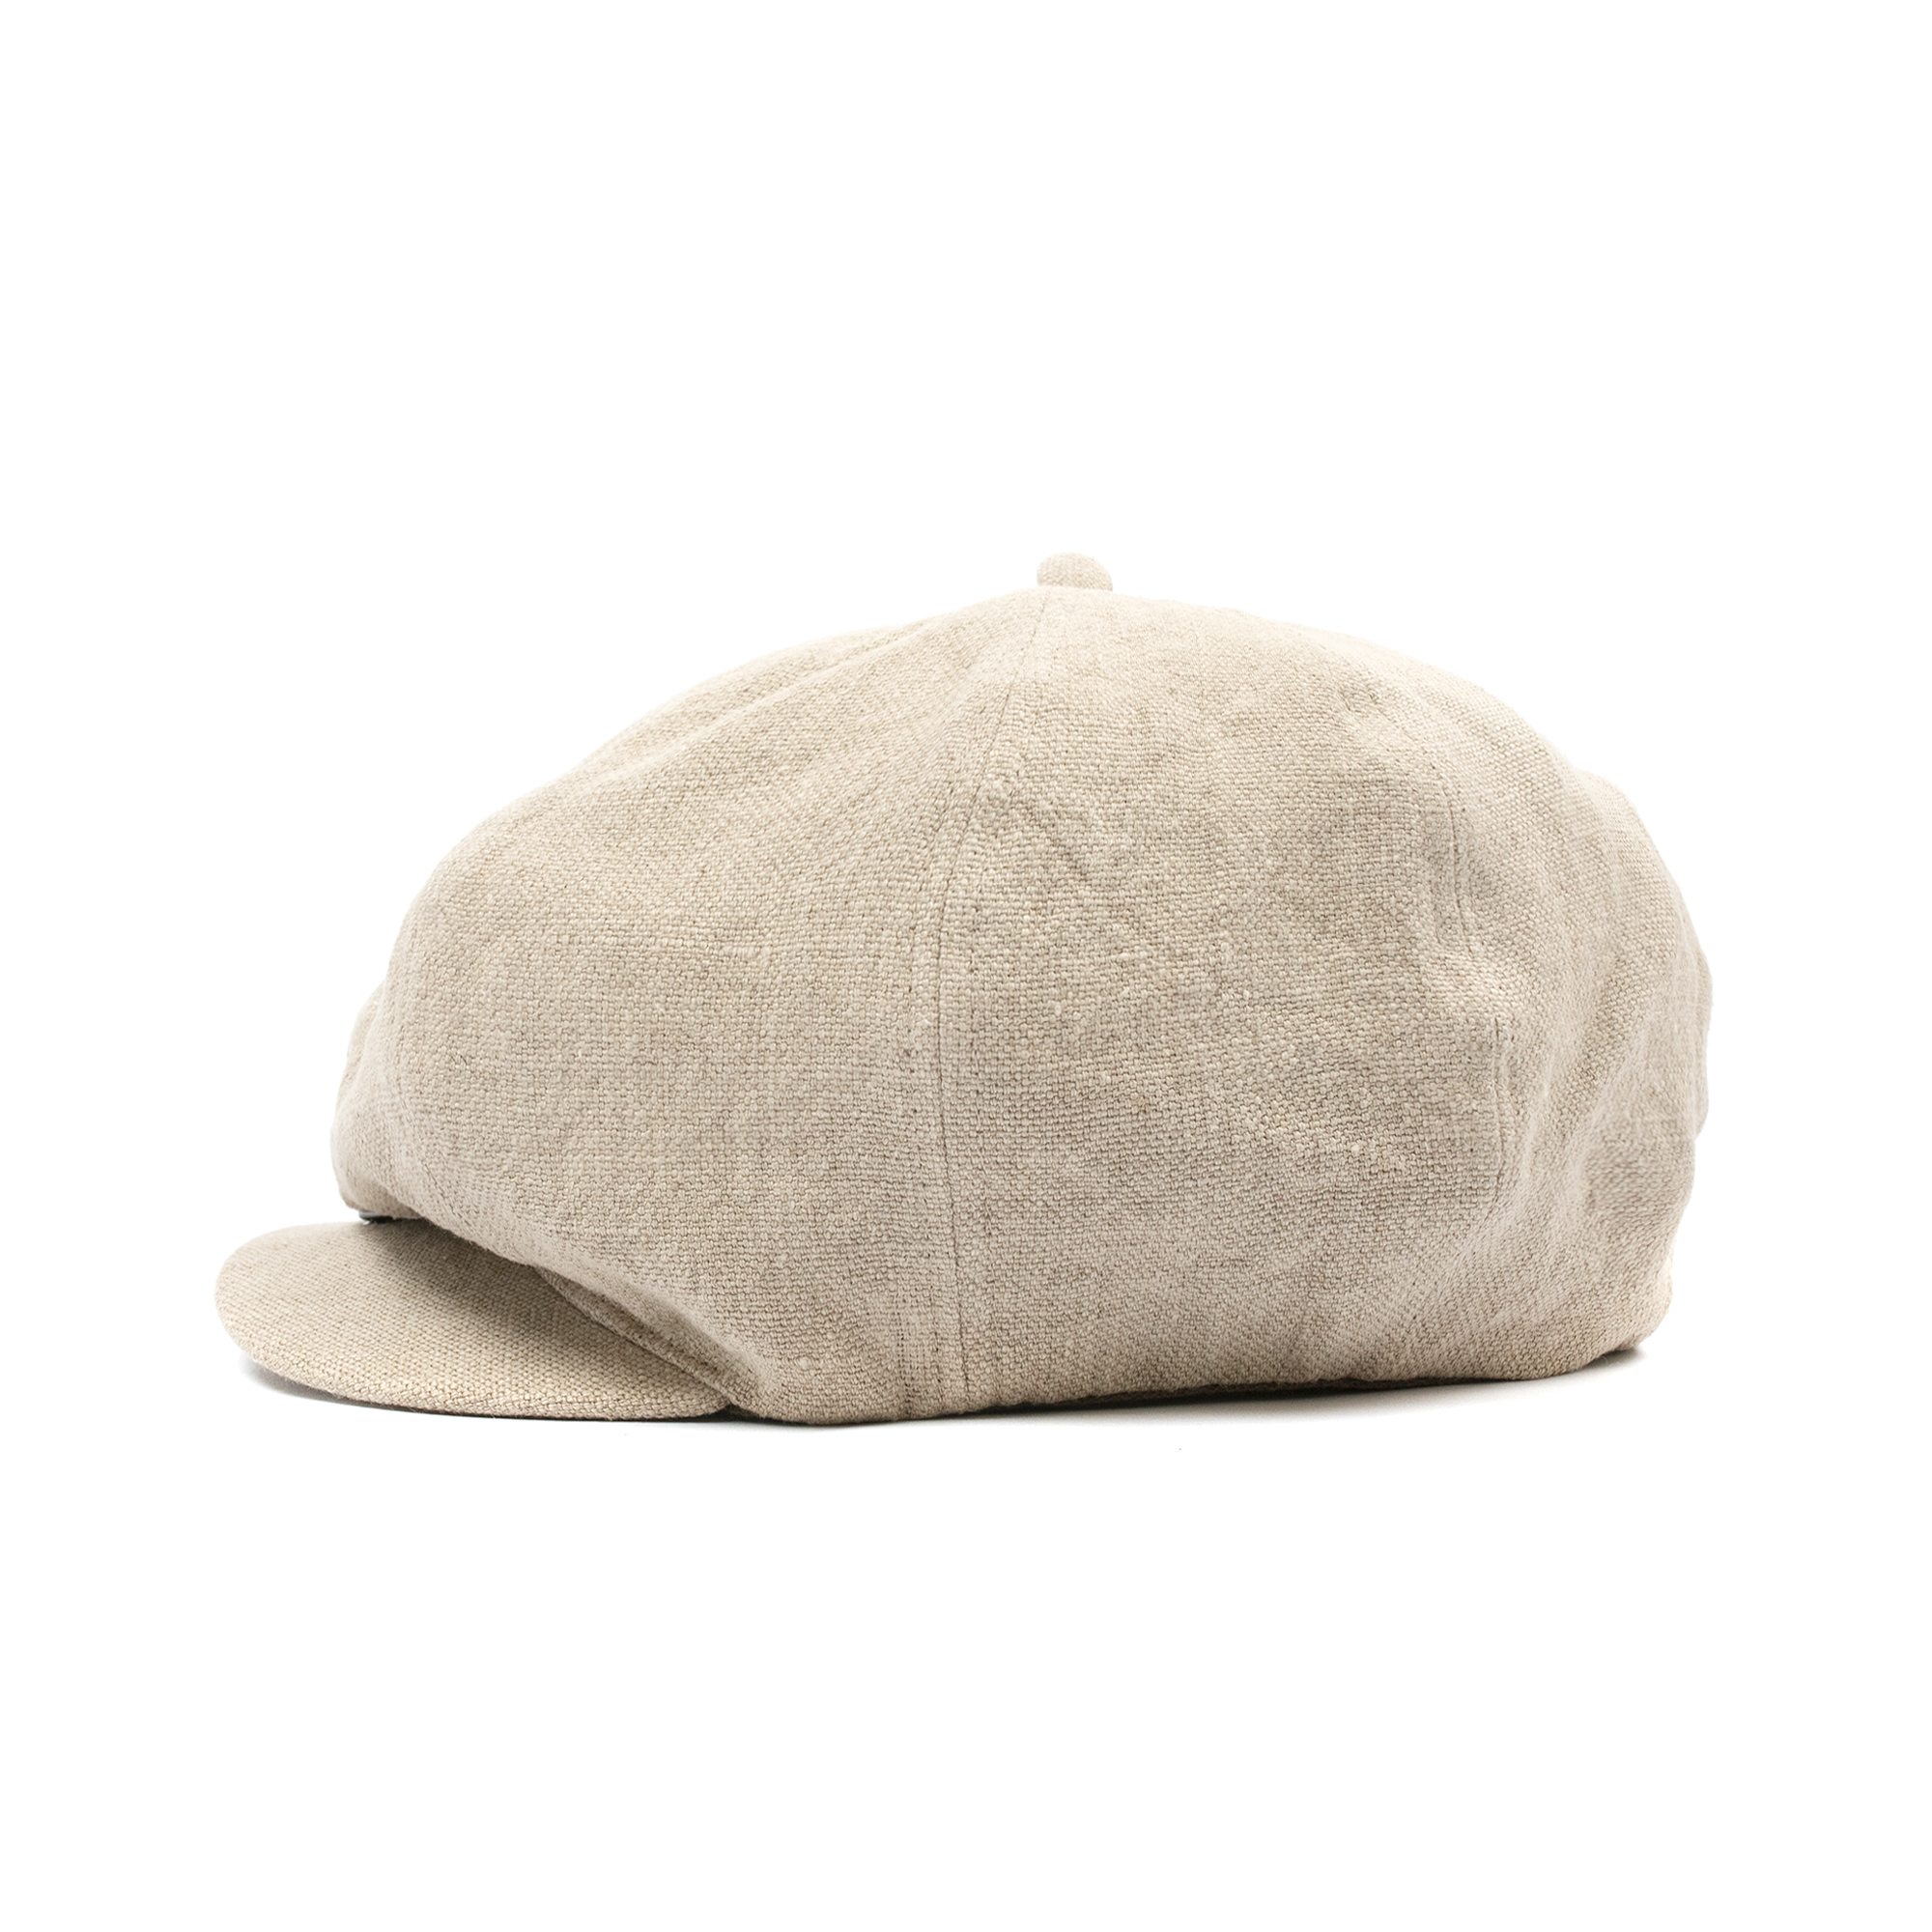 Nigel Cabourn - Casquette French Linen (Ivory)